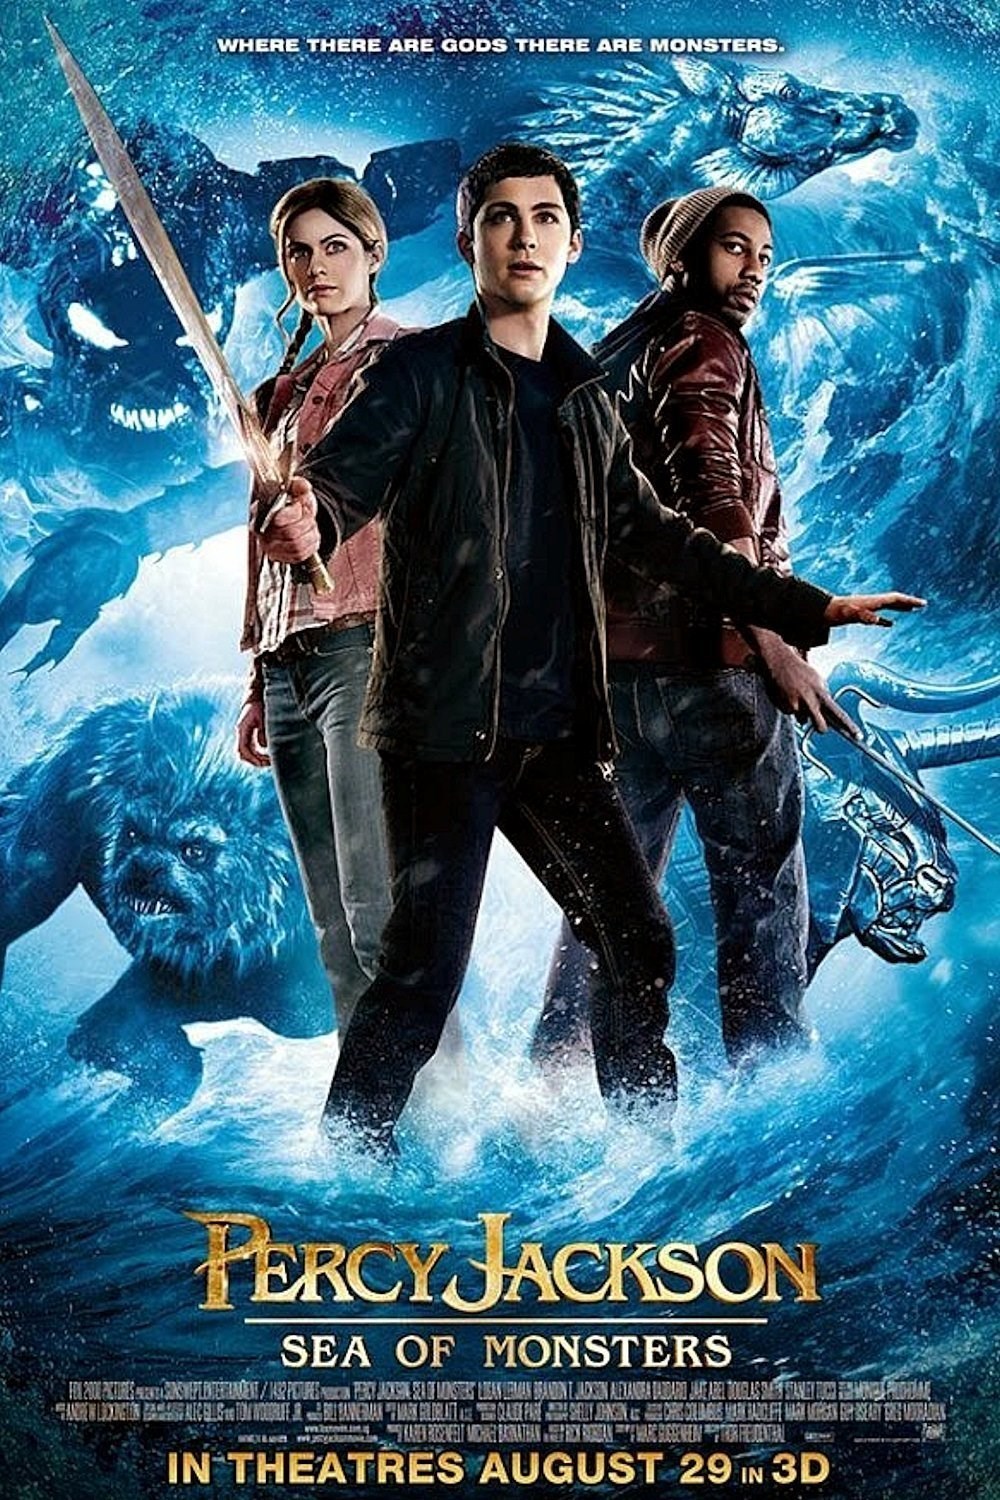 Percy Jackson: Sea of Monsters (2013)